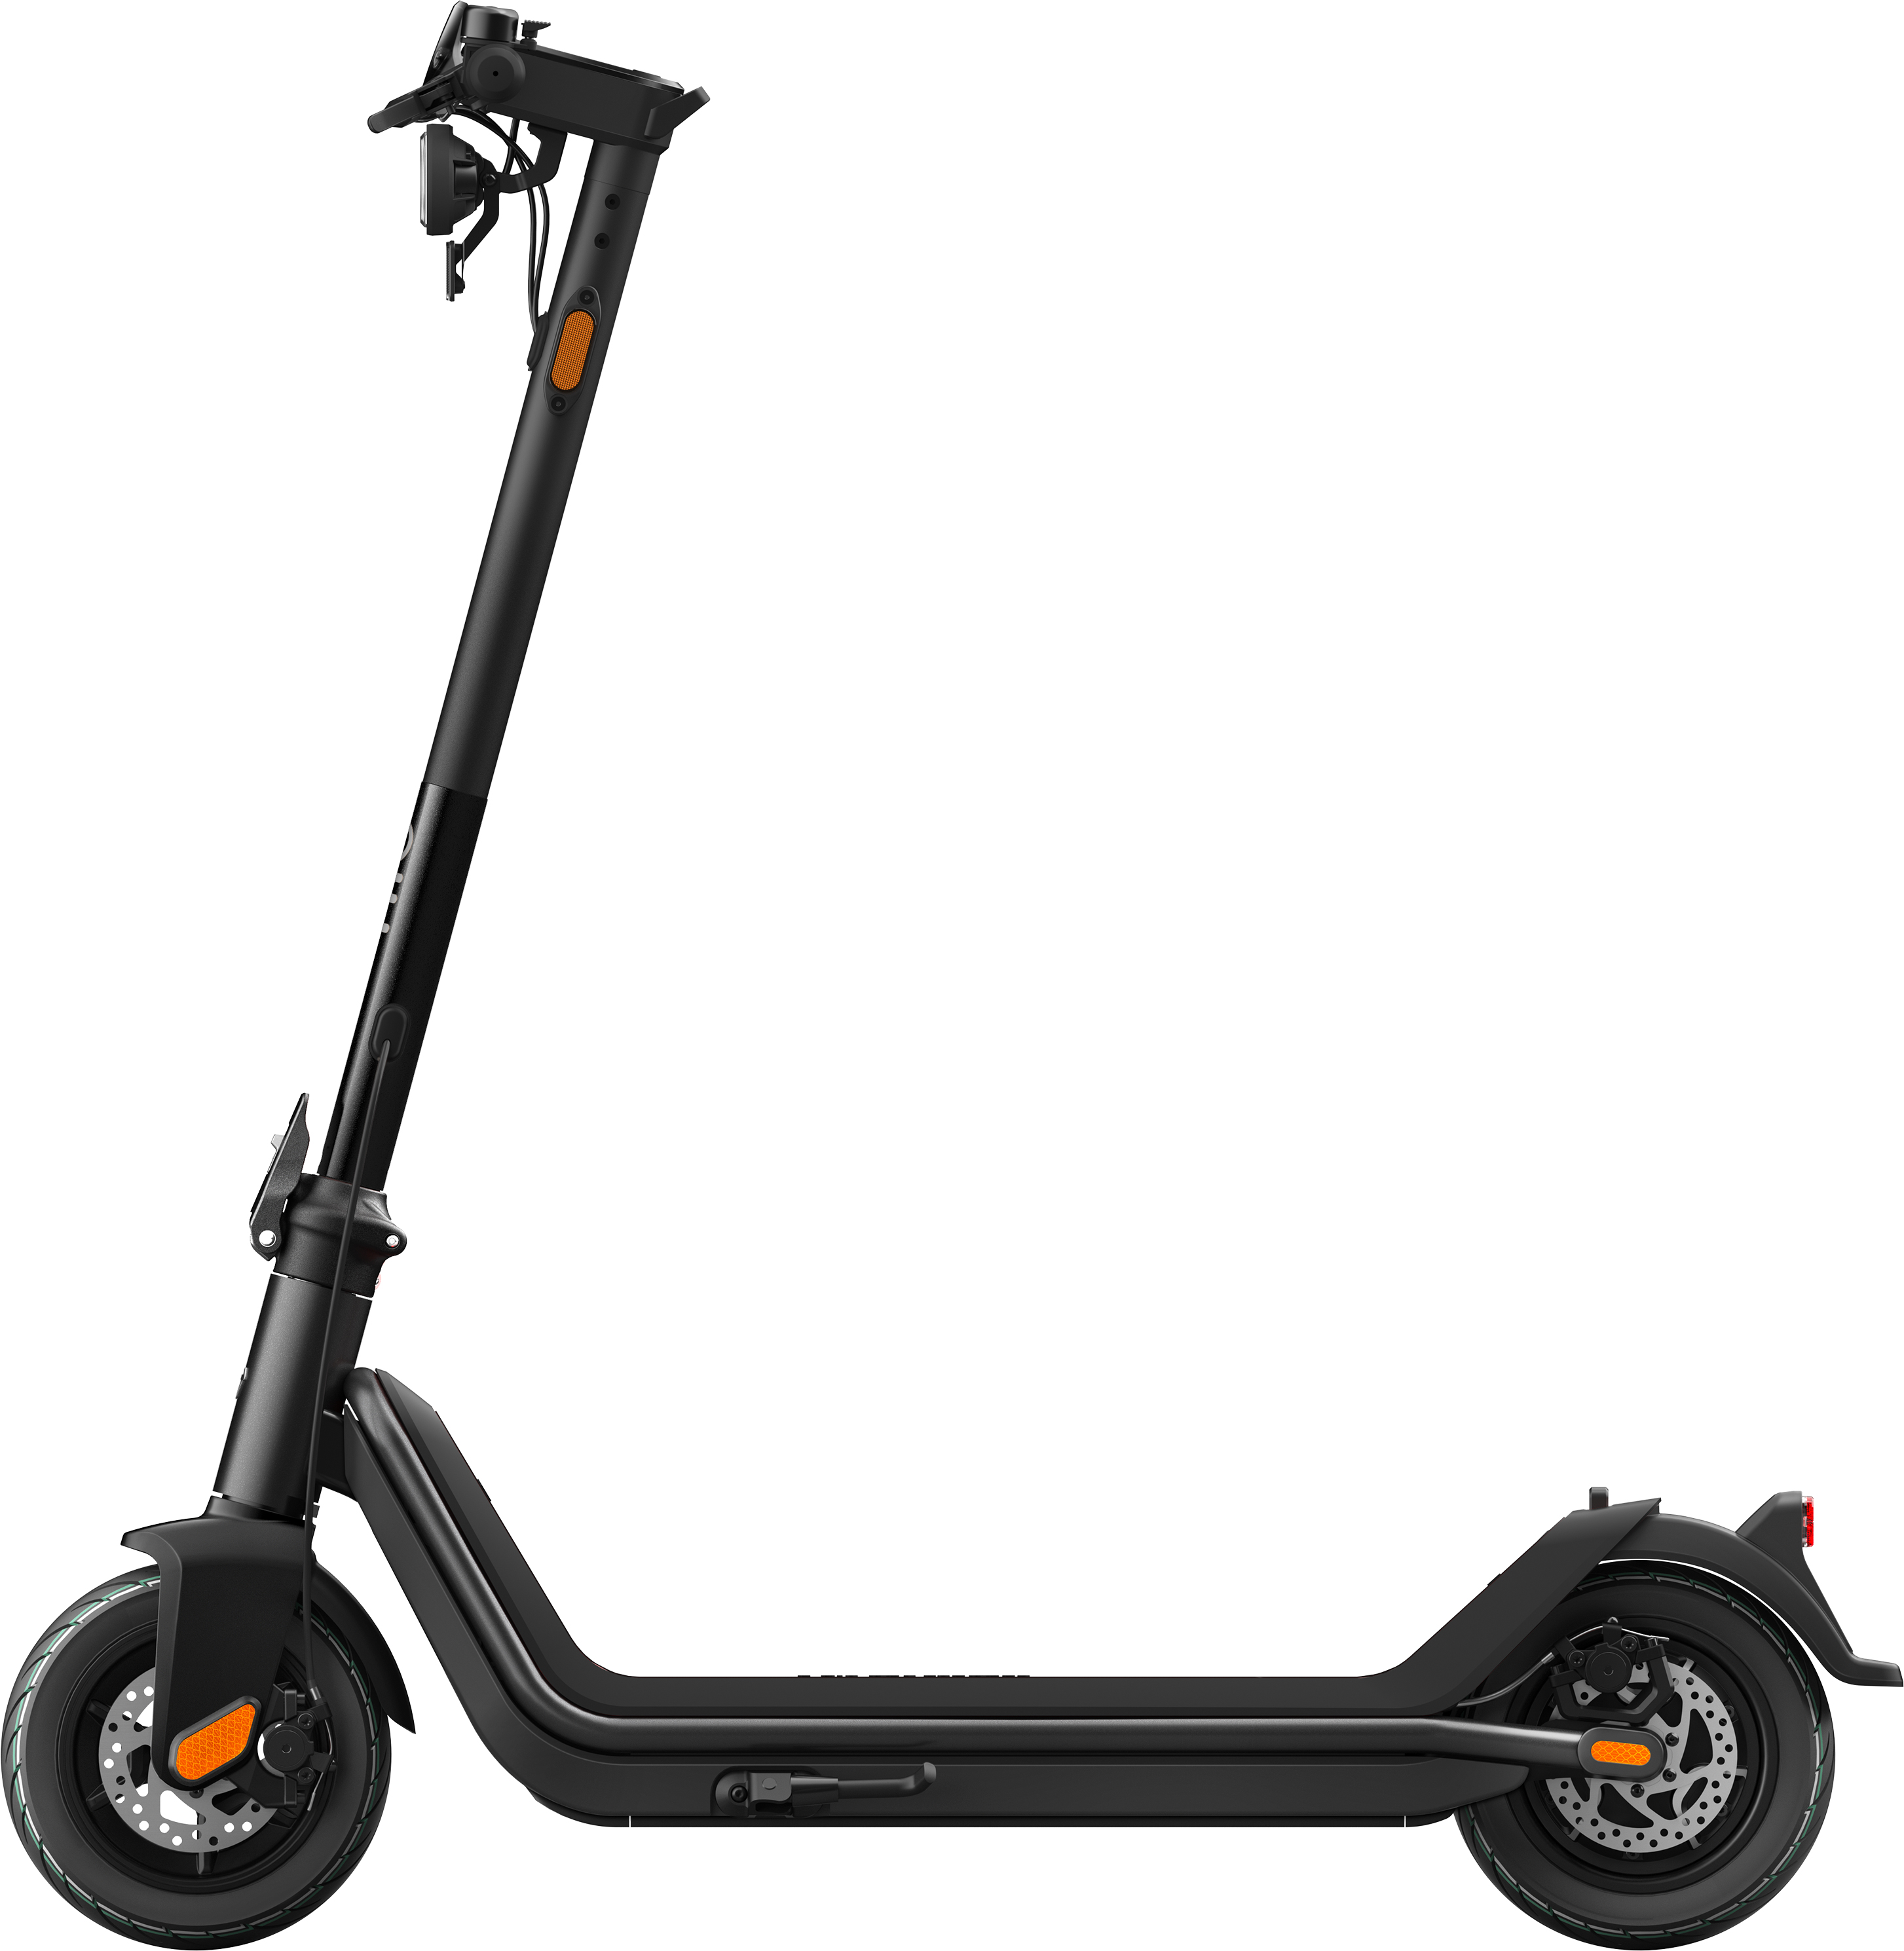 NIU KQi3 Pro Electric Scooter Foldable 31 Miles Range Top Speed 20 mph Fast Charging Battery Foldable Commuting - image 1 of 12